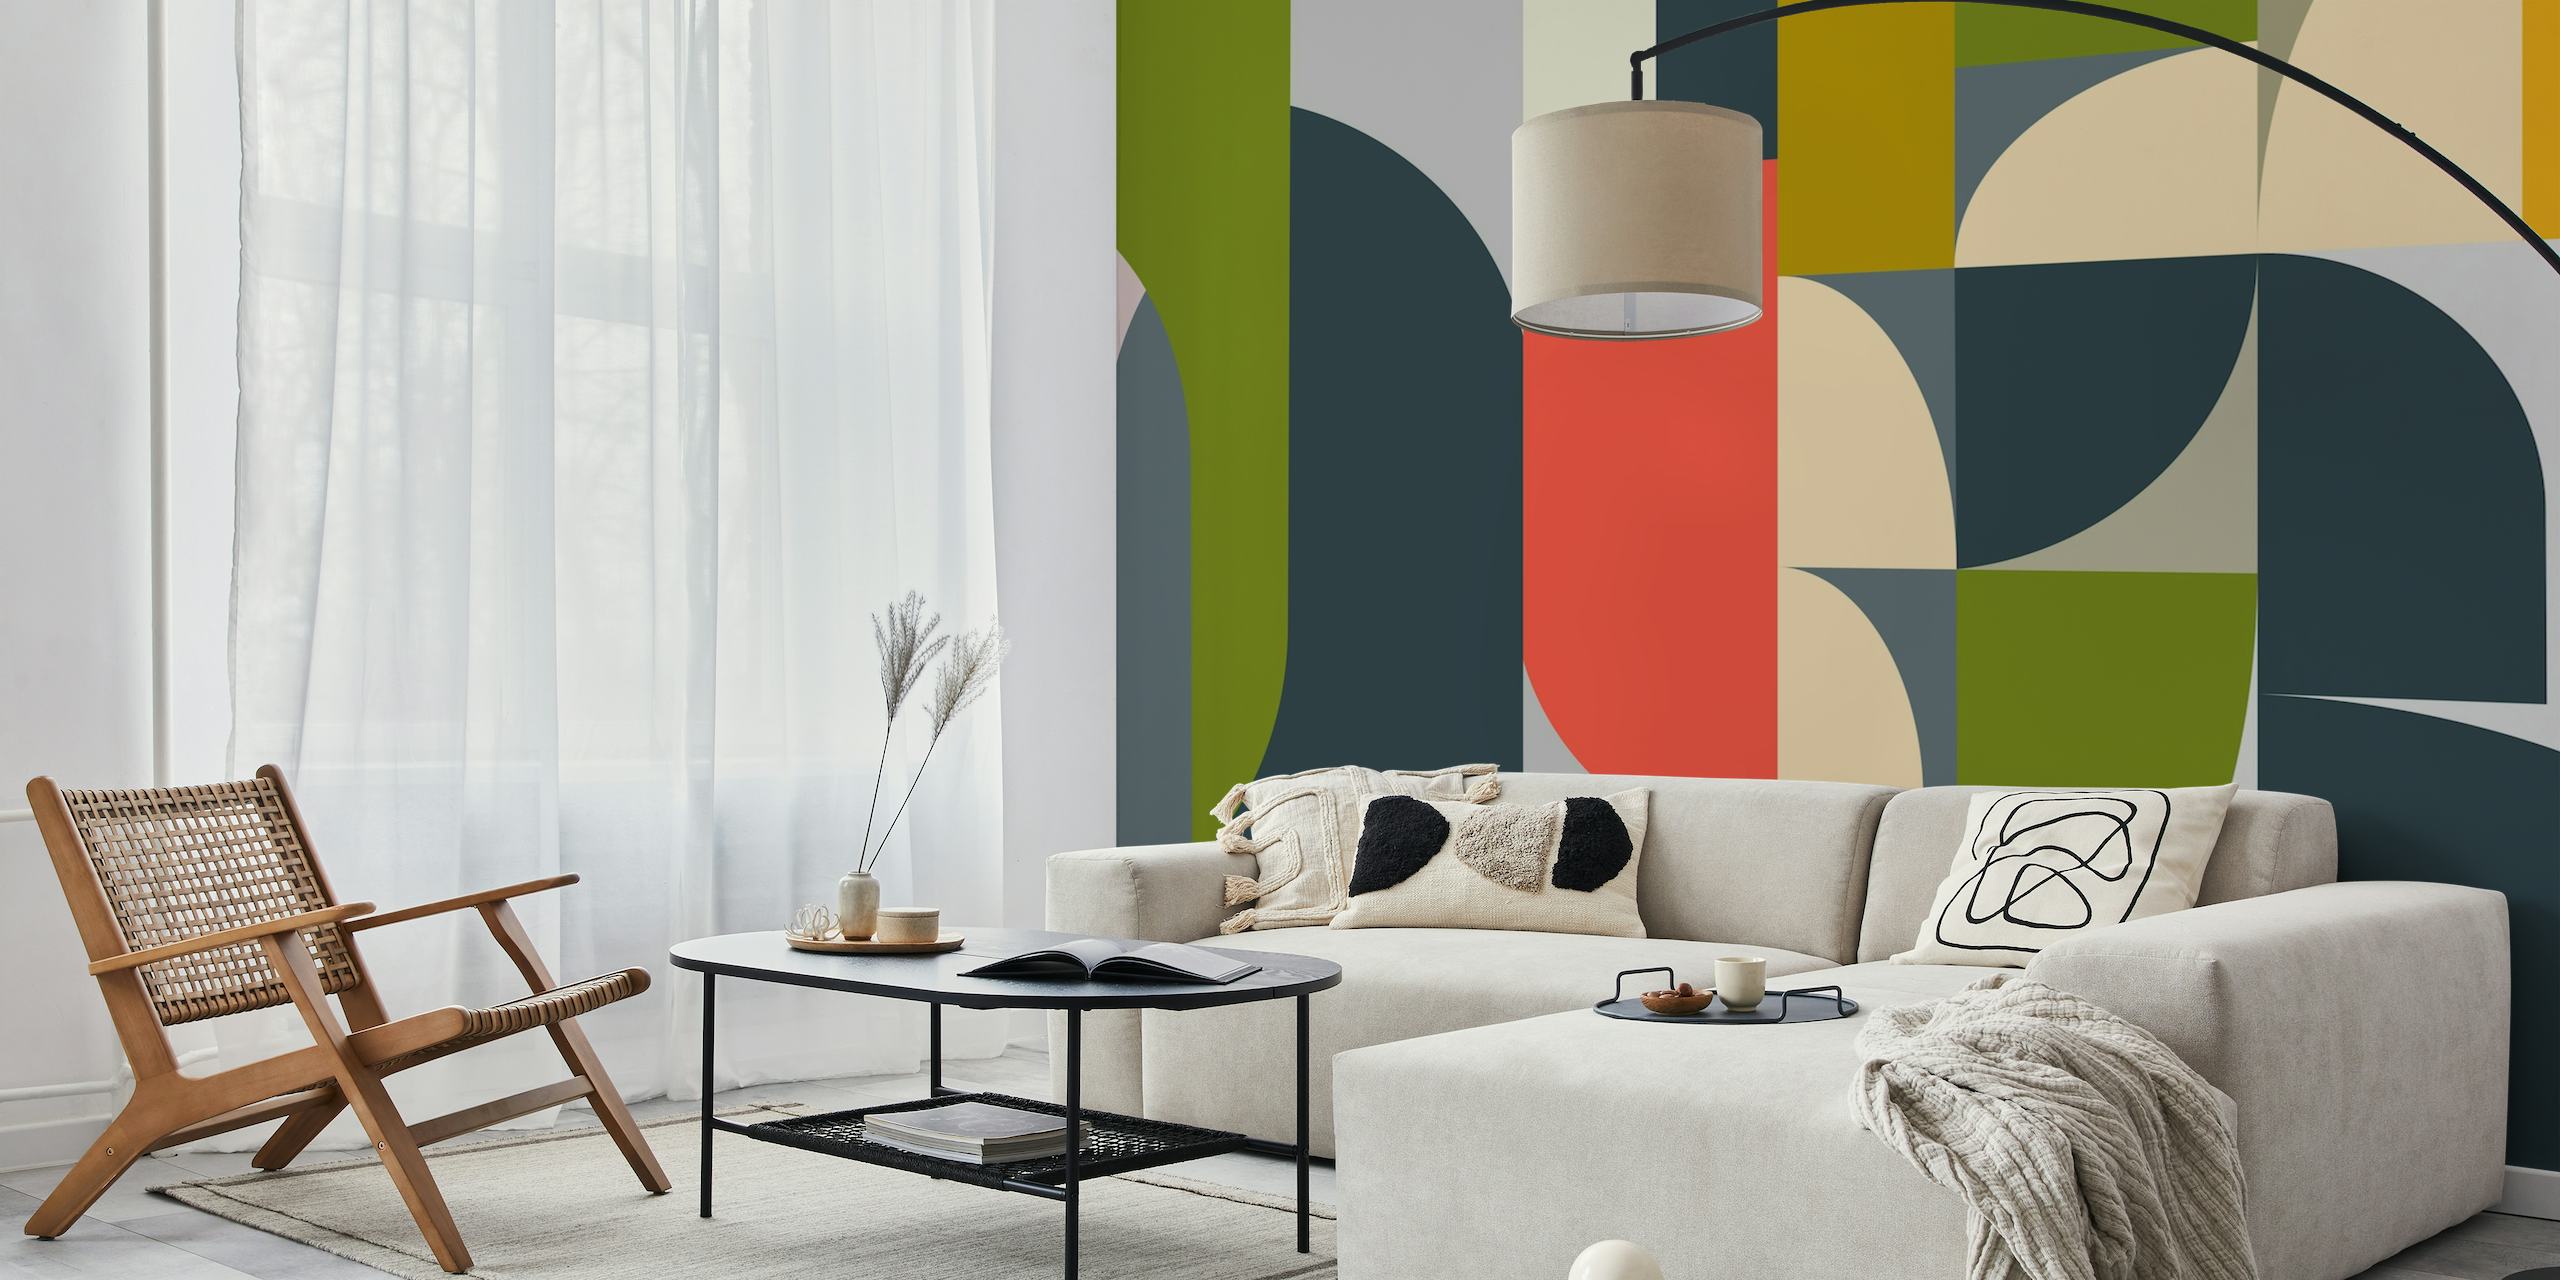 Modern abstract geometric wall mural with a fusion of shapes in muted colors